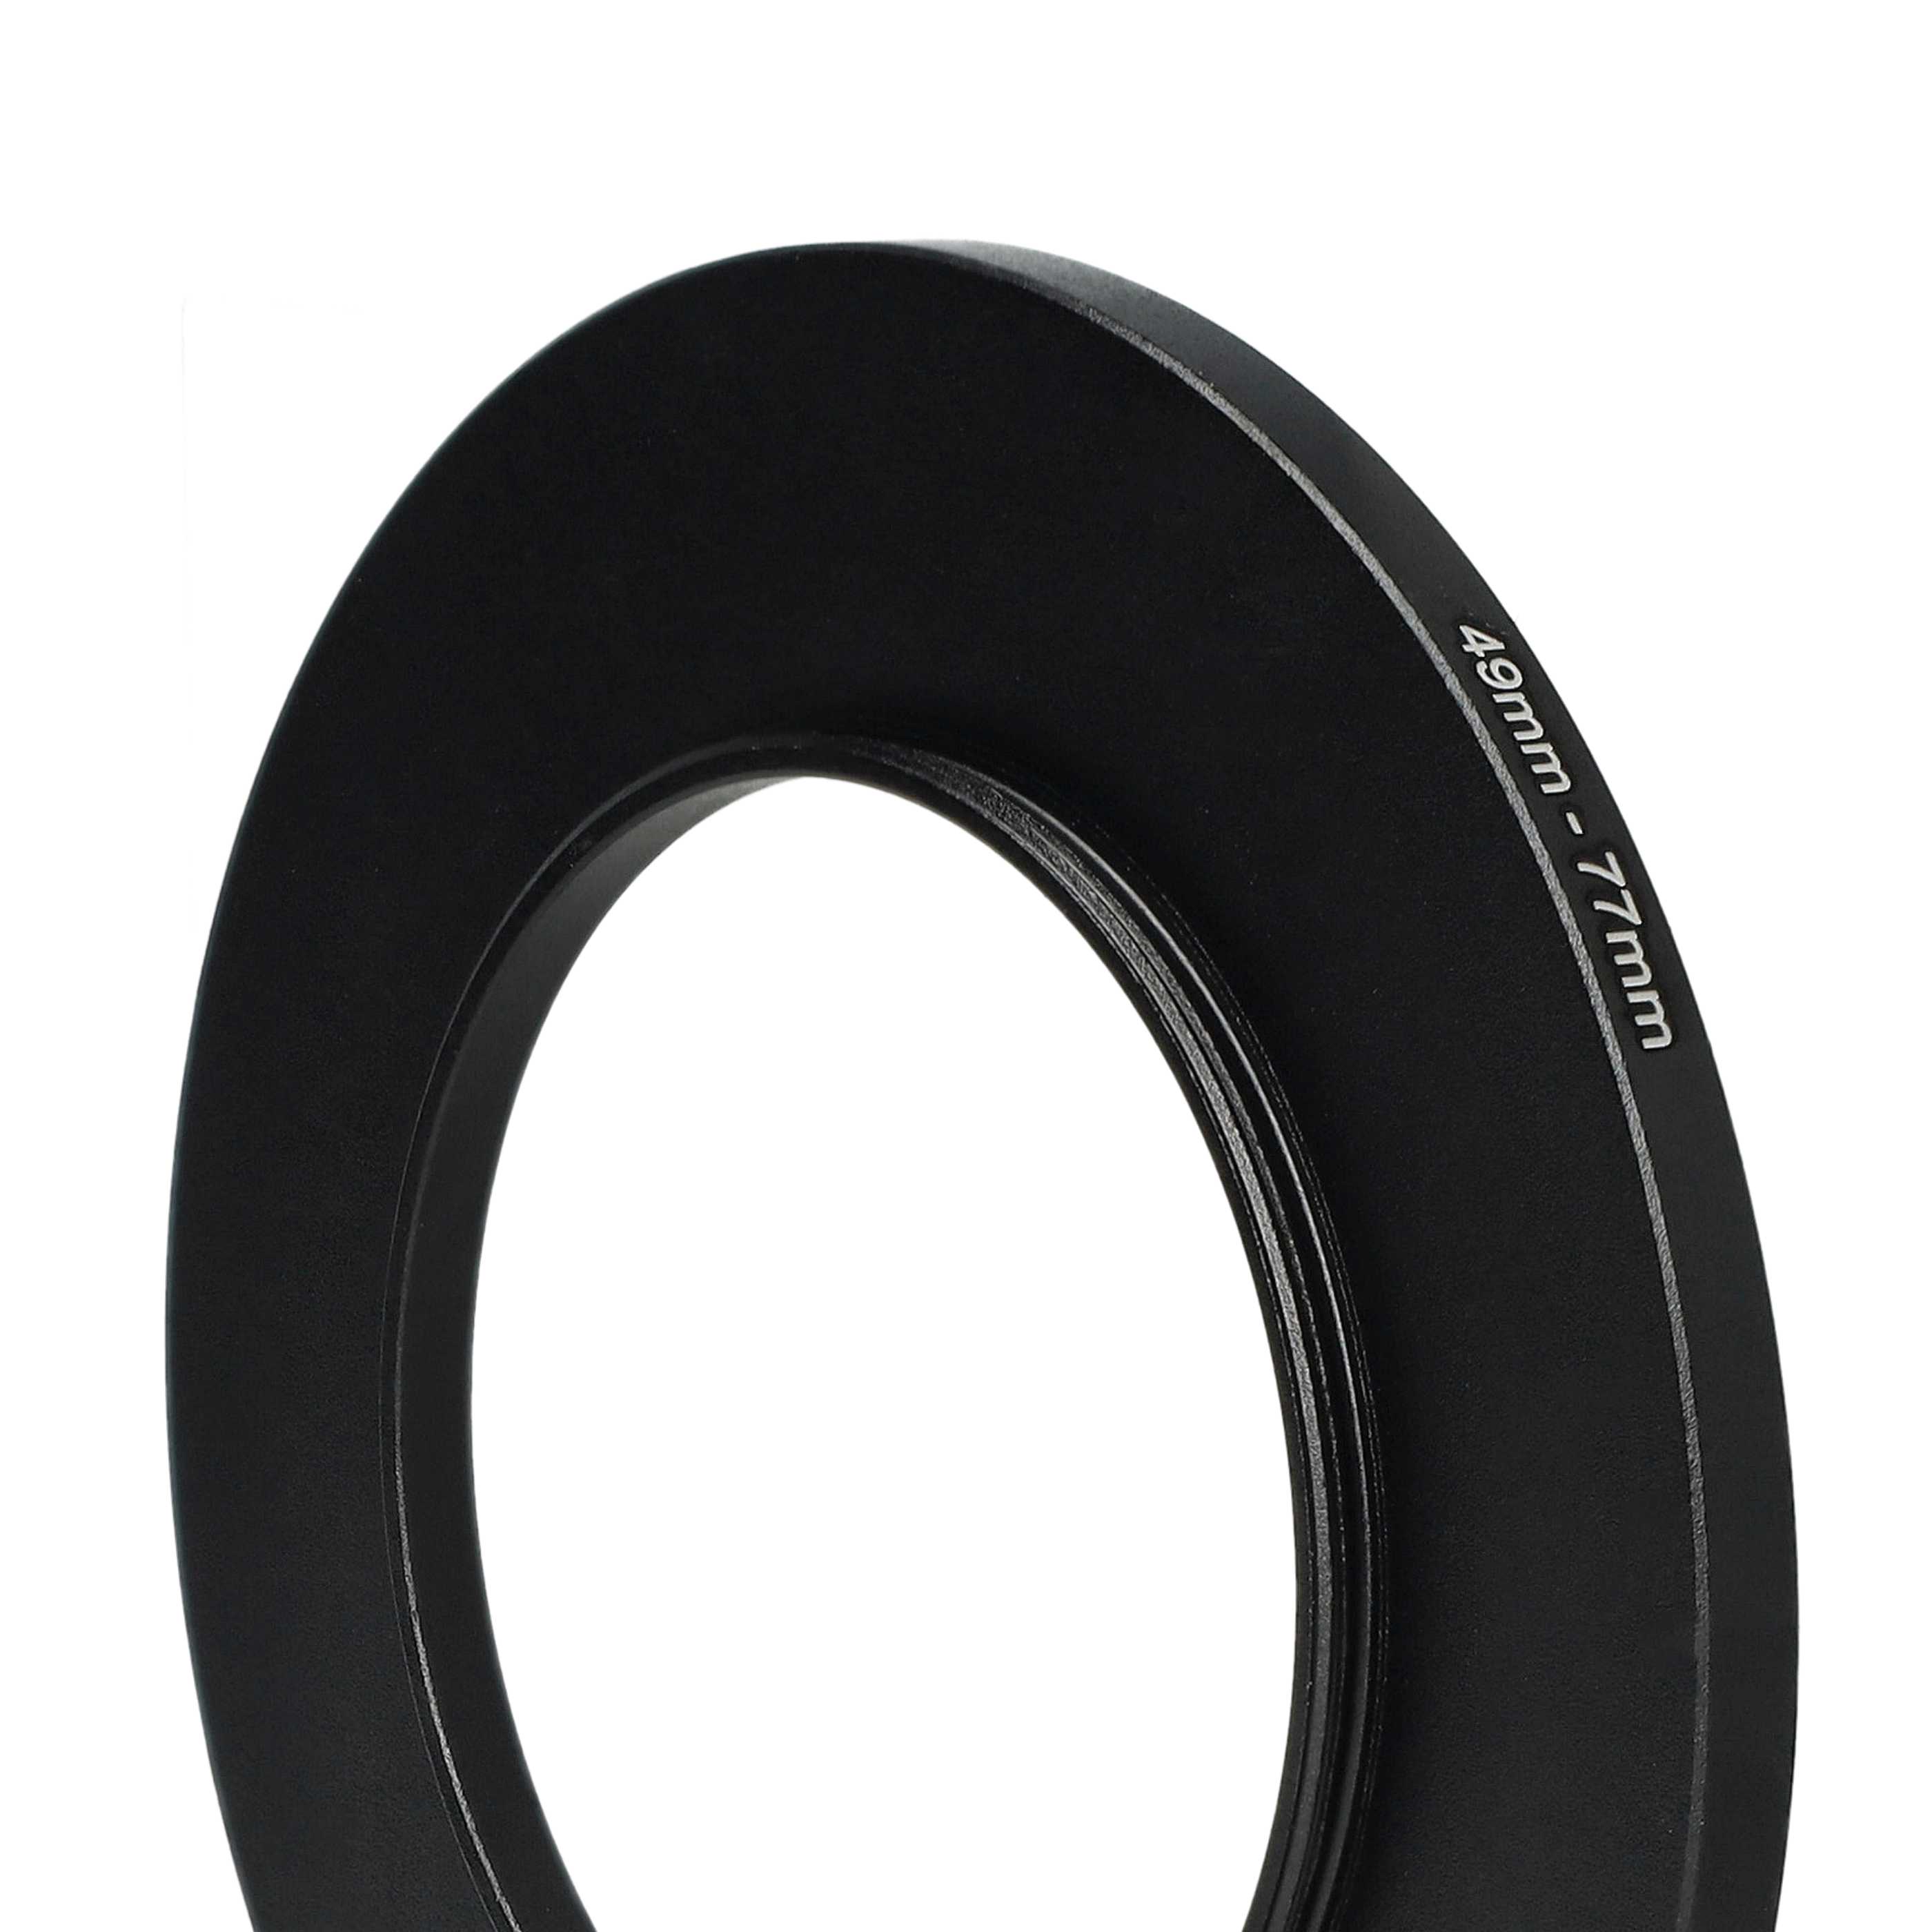 Step-Up Ring Adapter of 49 mm to 77 mmfor various Camera Lens - Filter Adapter